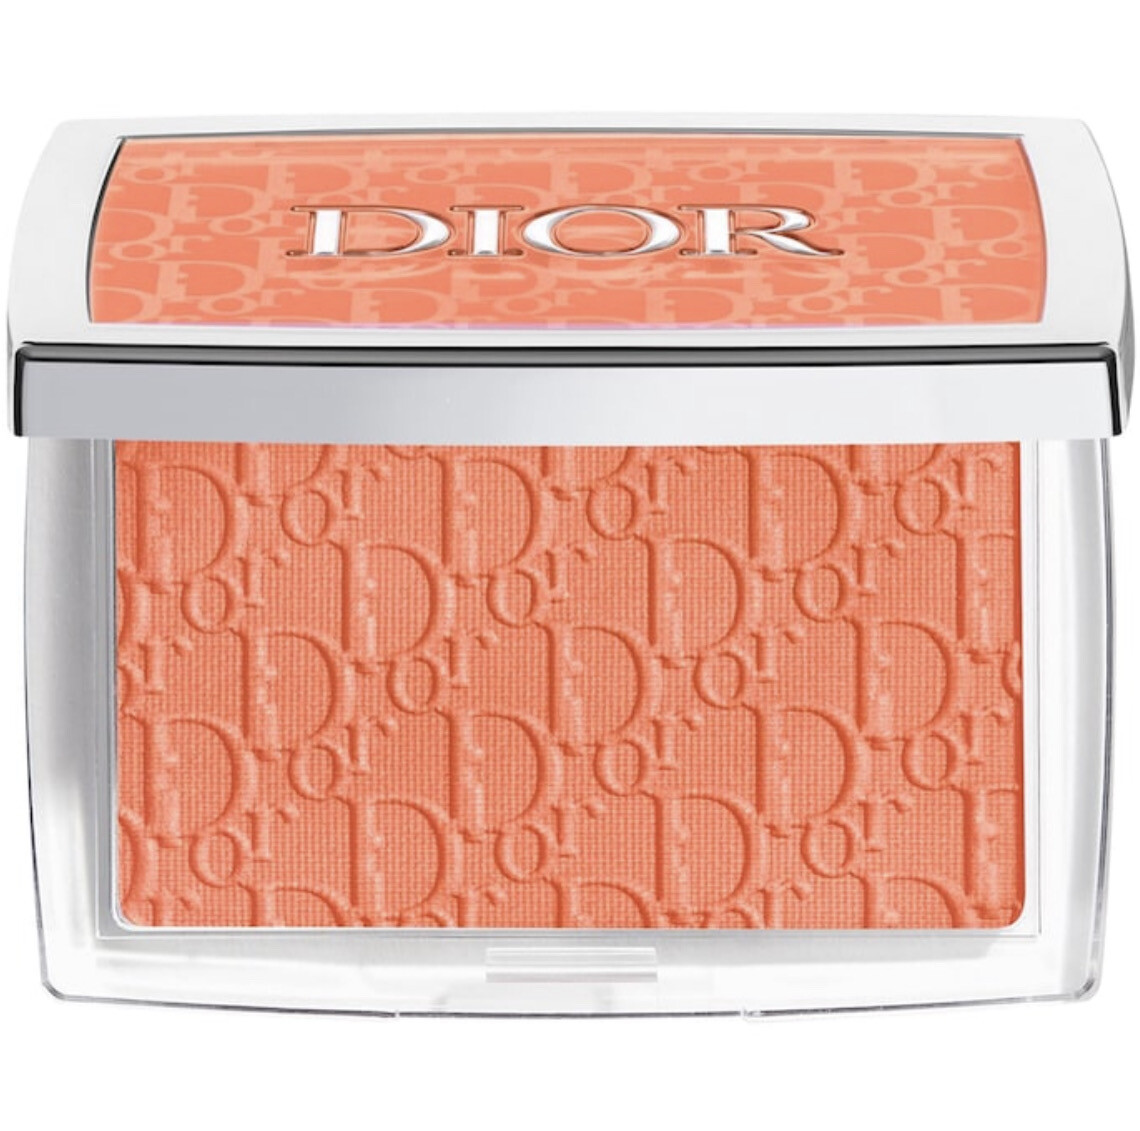 Dior - BACKSTAGE Rosy Glow Blush | 004 Coral - a luminous coral